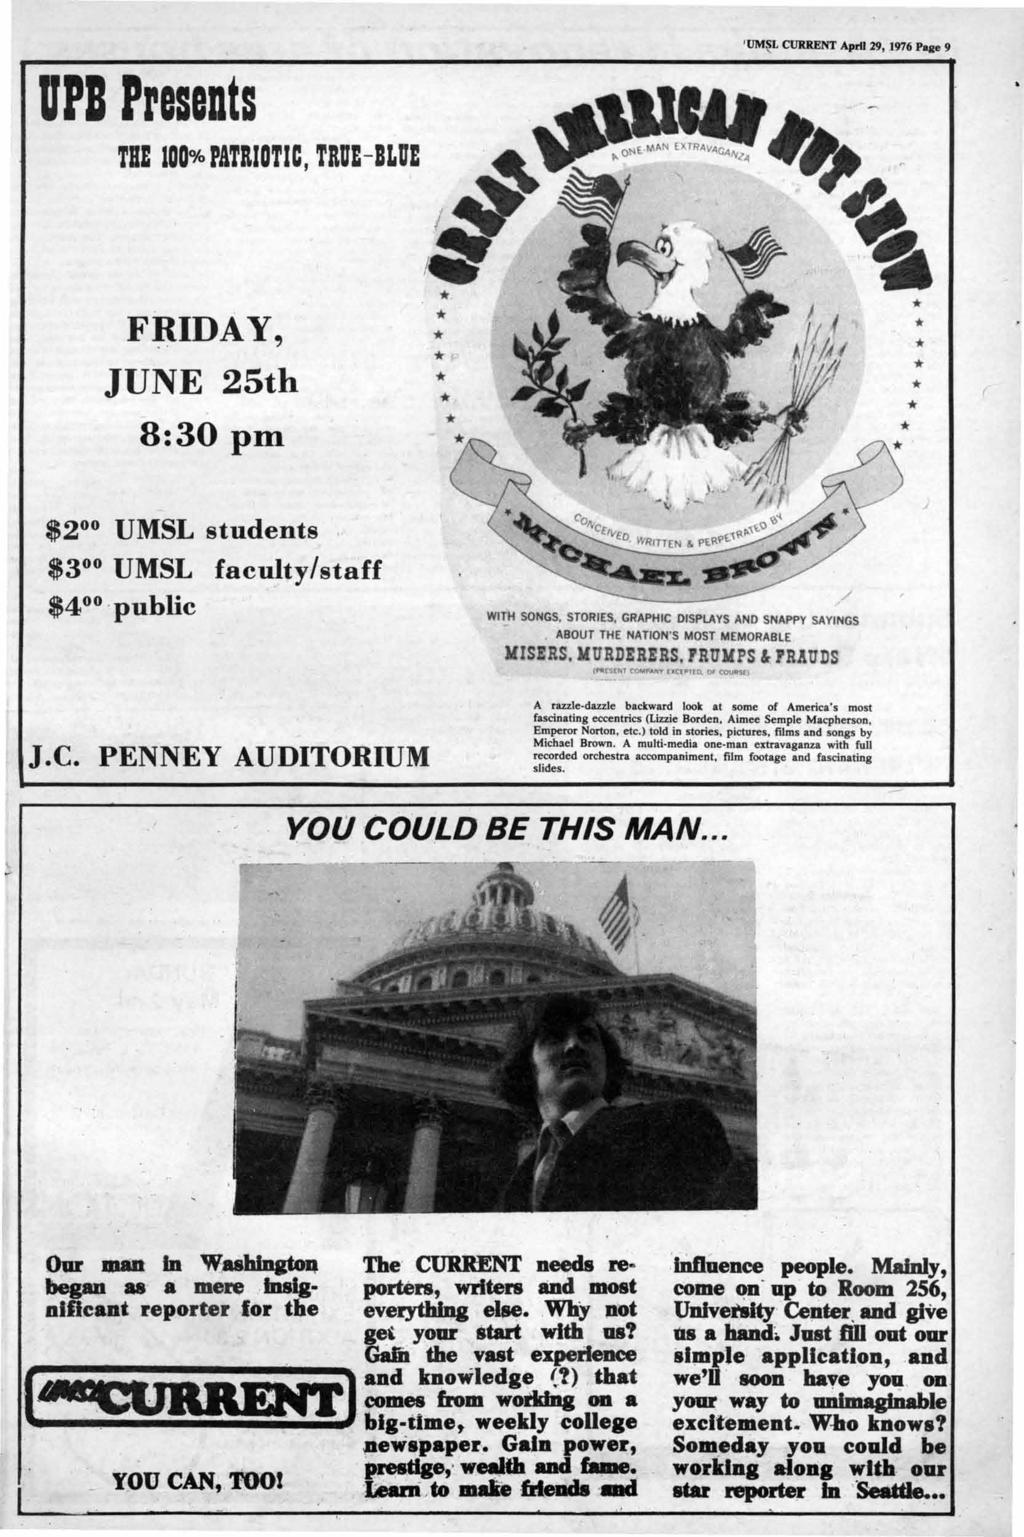 IUM~L CURRENT April 29, 1976 Page 9 UPI PreseDts THE 0% PATRIOTIC, TRUE-BLUE F~IDAY, JUNE 2th 8:30 pin * * * * ( $2 00 UMSL students ' $3 00 UMSL facu~ty/staff $4 00.